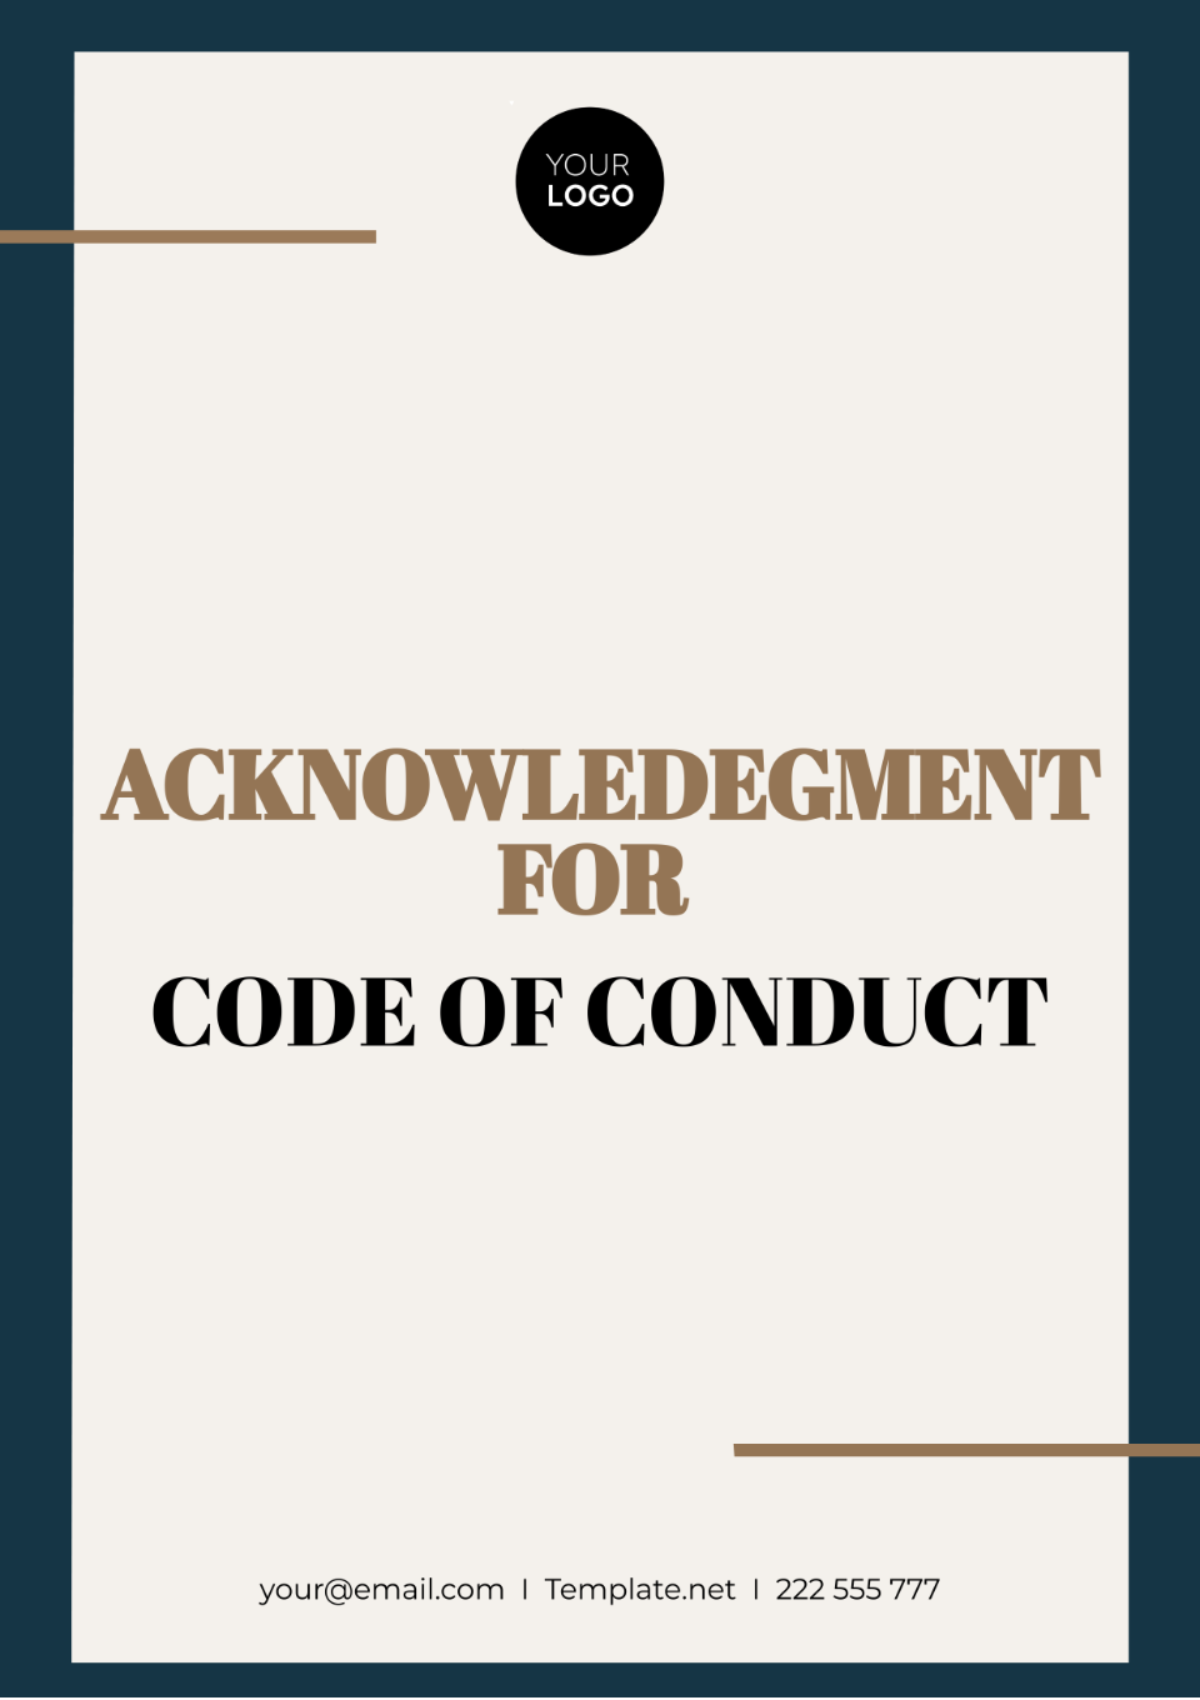 Acknowledgement for Code of Conduct Template